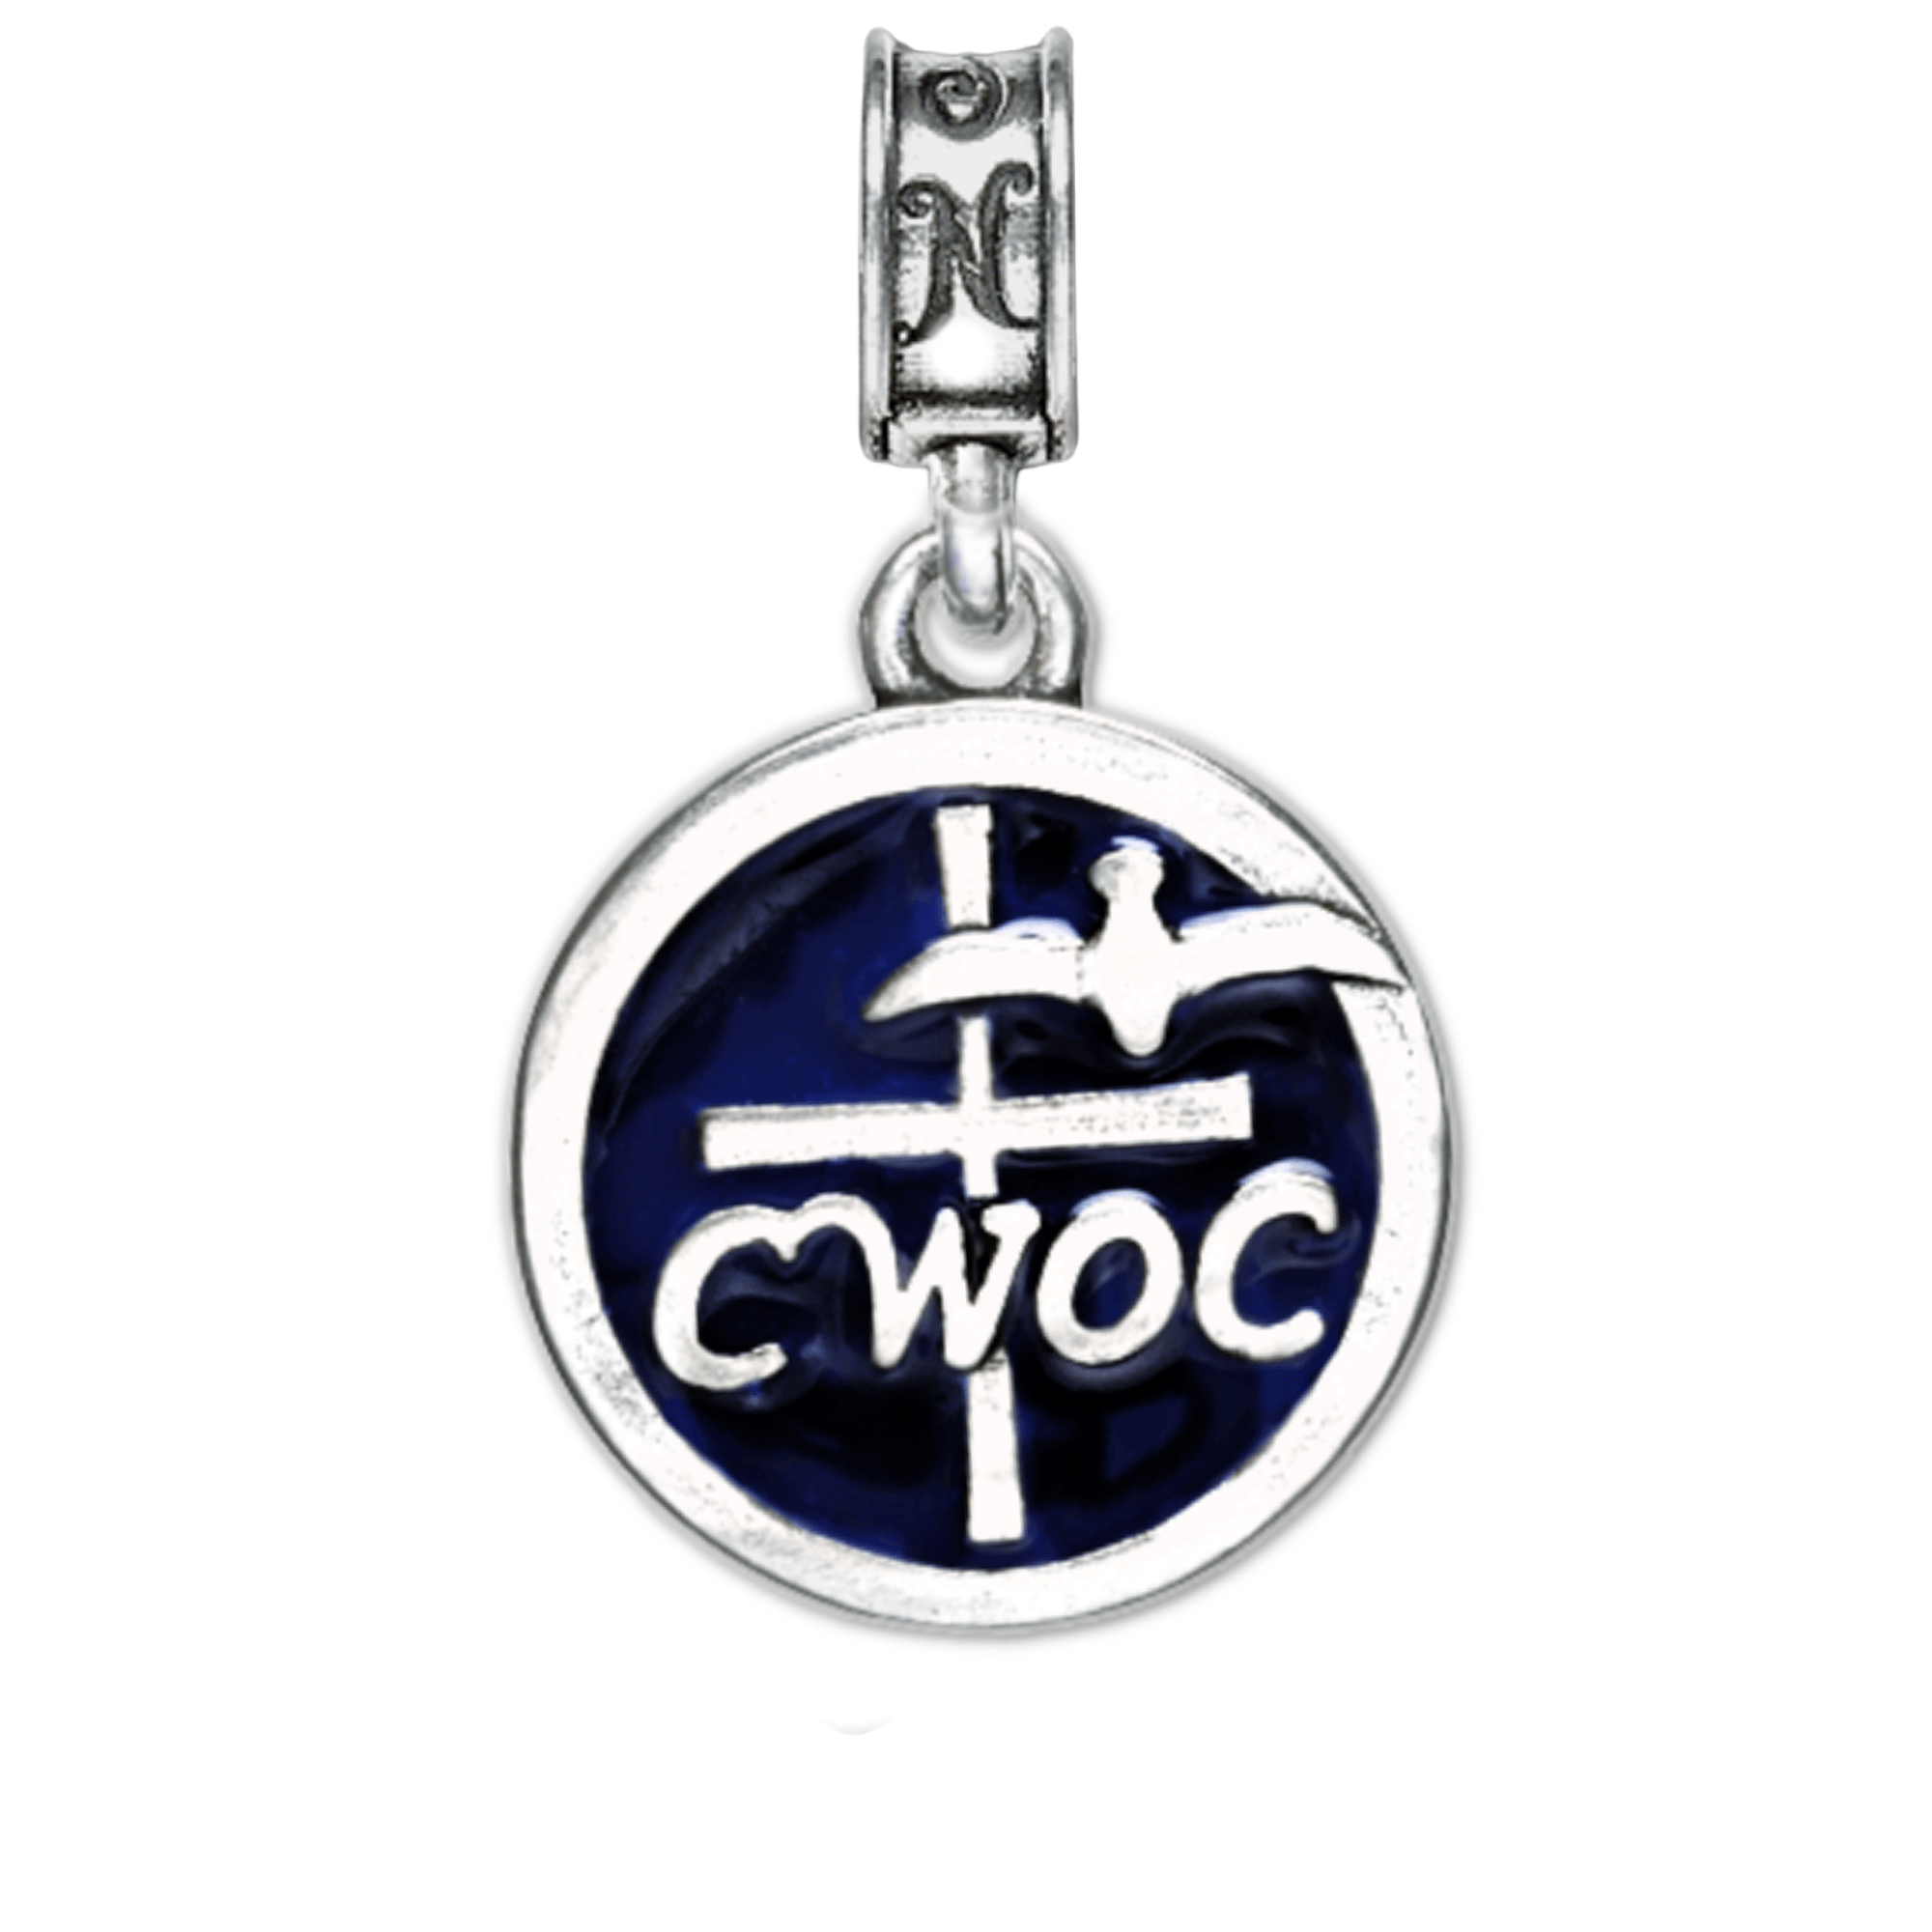 Military Jewelry, Military Charms, Military Gifts, CWOC, Catholic Women of the Chapel